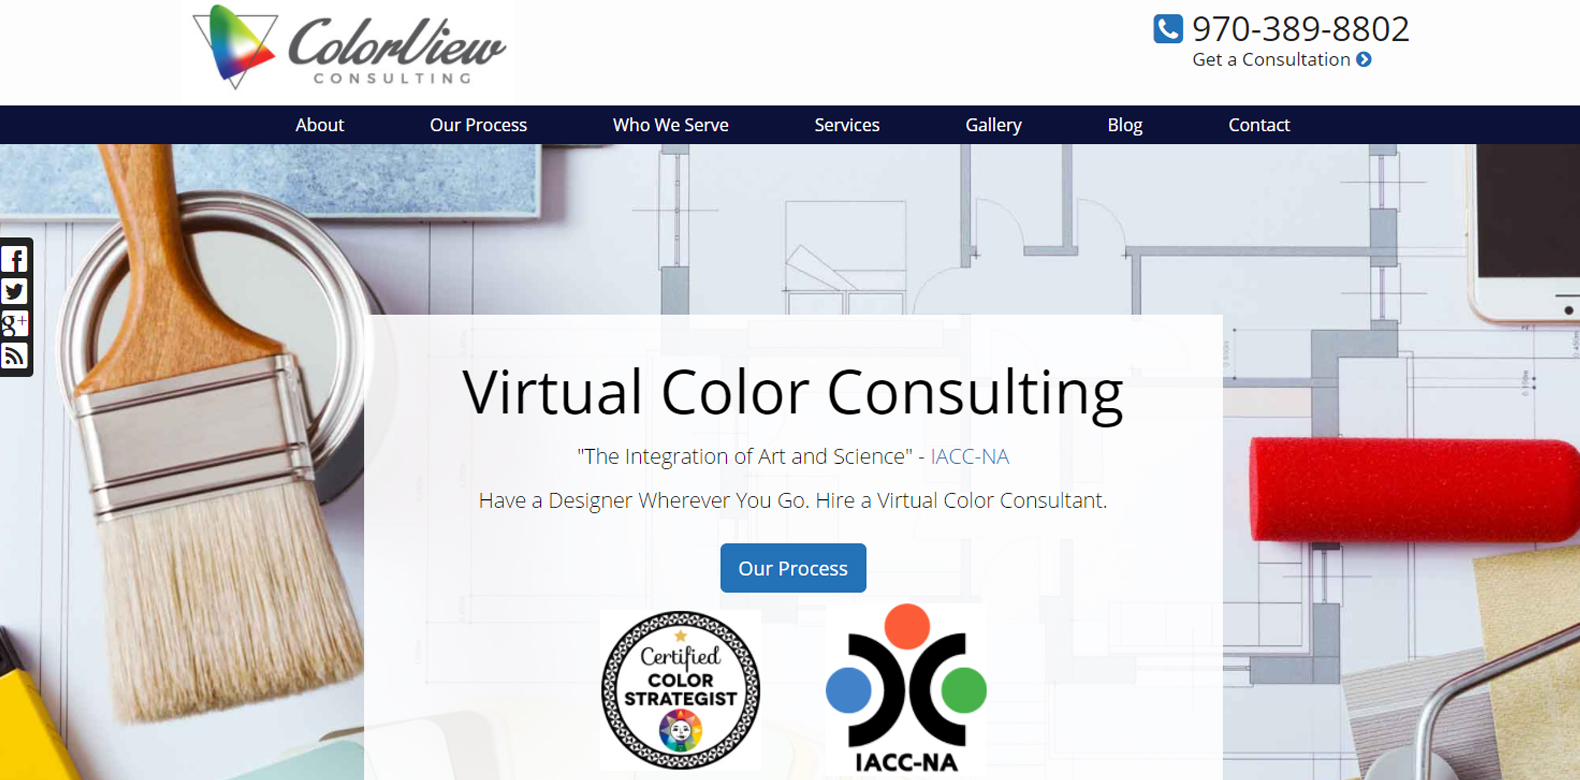 
New Website Launch: ColorView Consulting